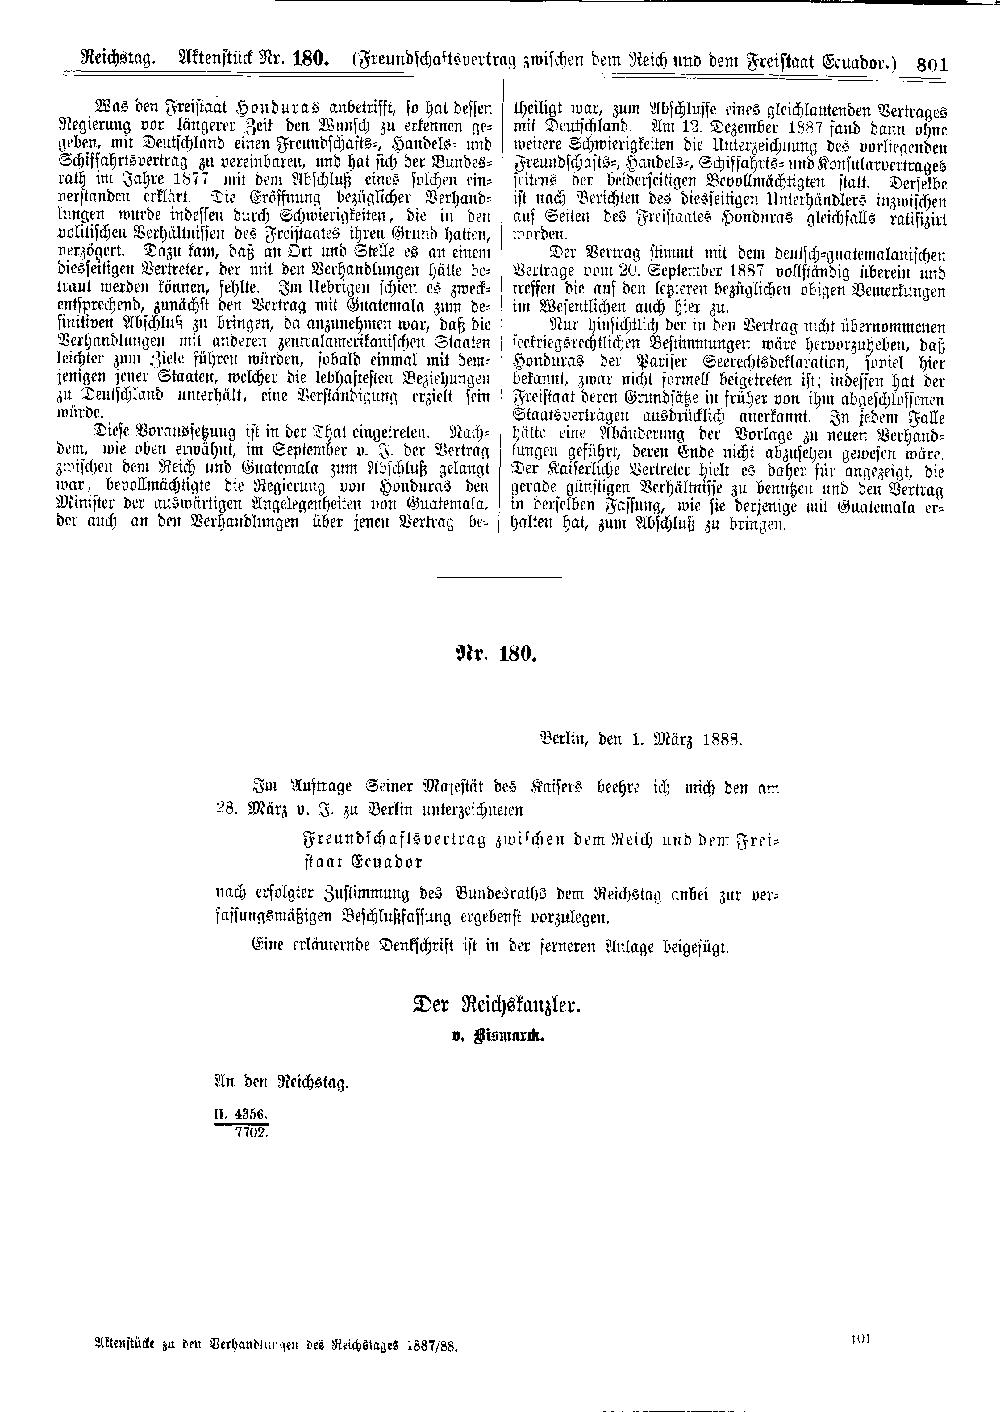 Scan of page 801